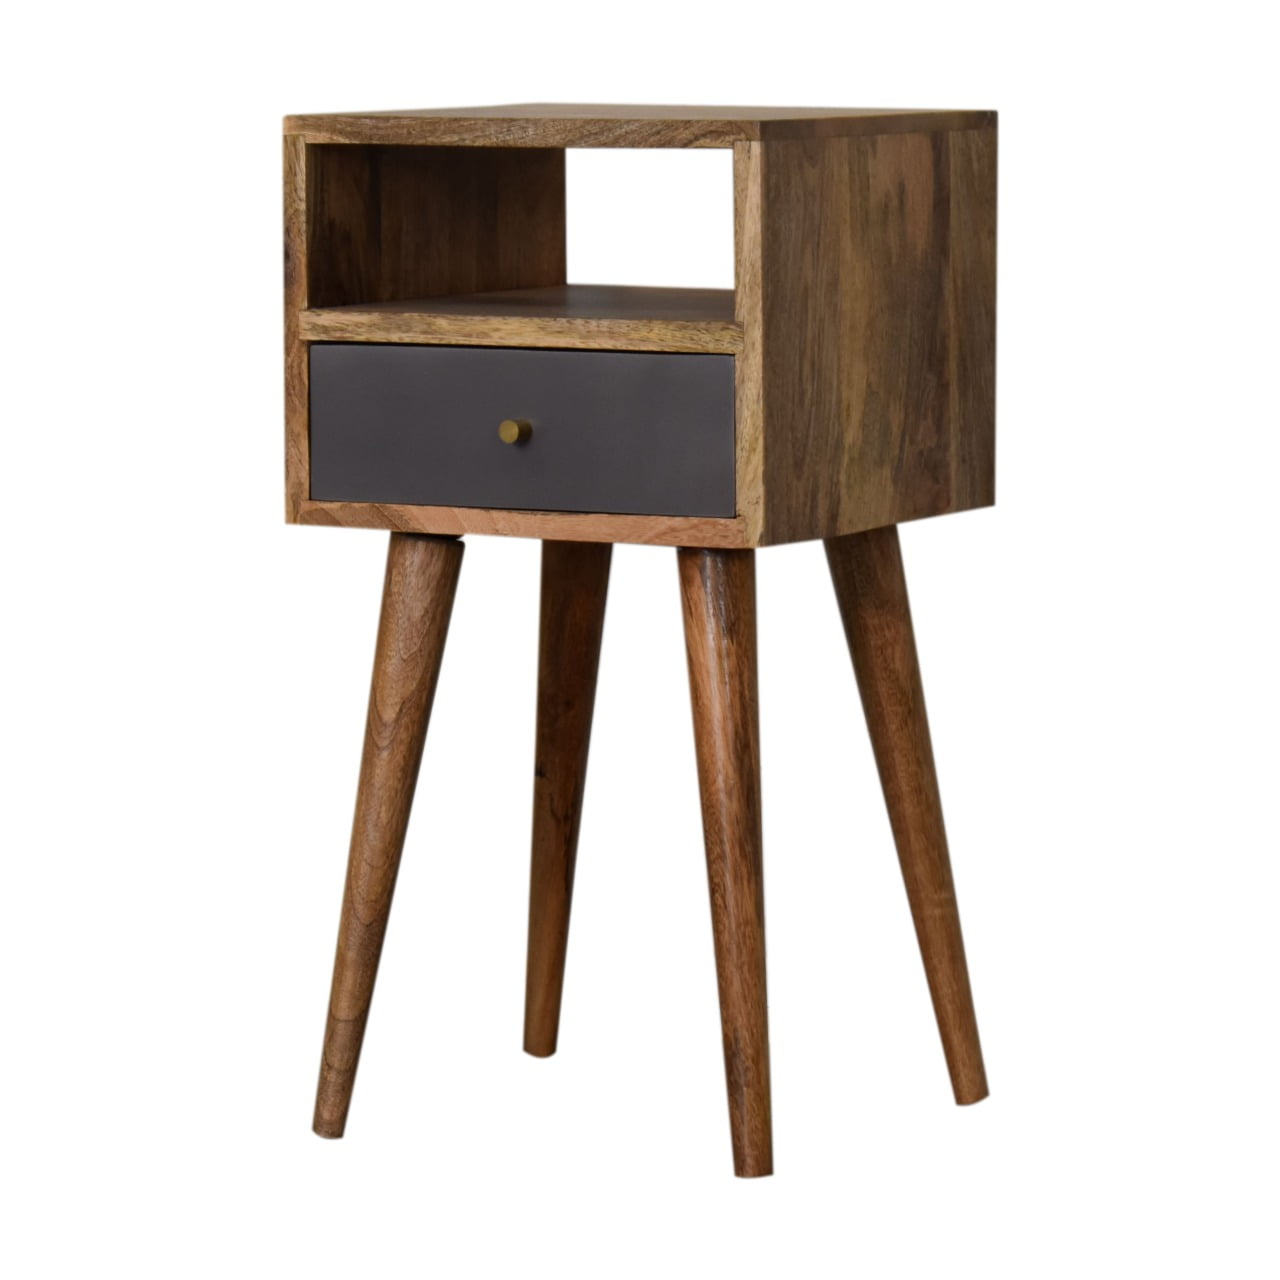 Elly Slate handpainted narrow bedside table made from solid wood | malletandplane.com